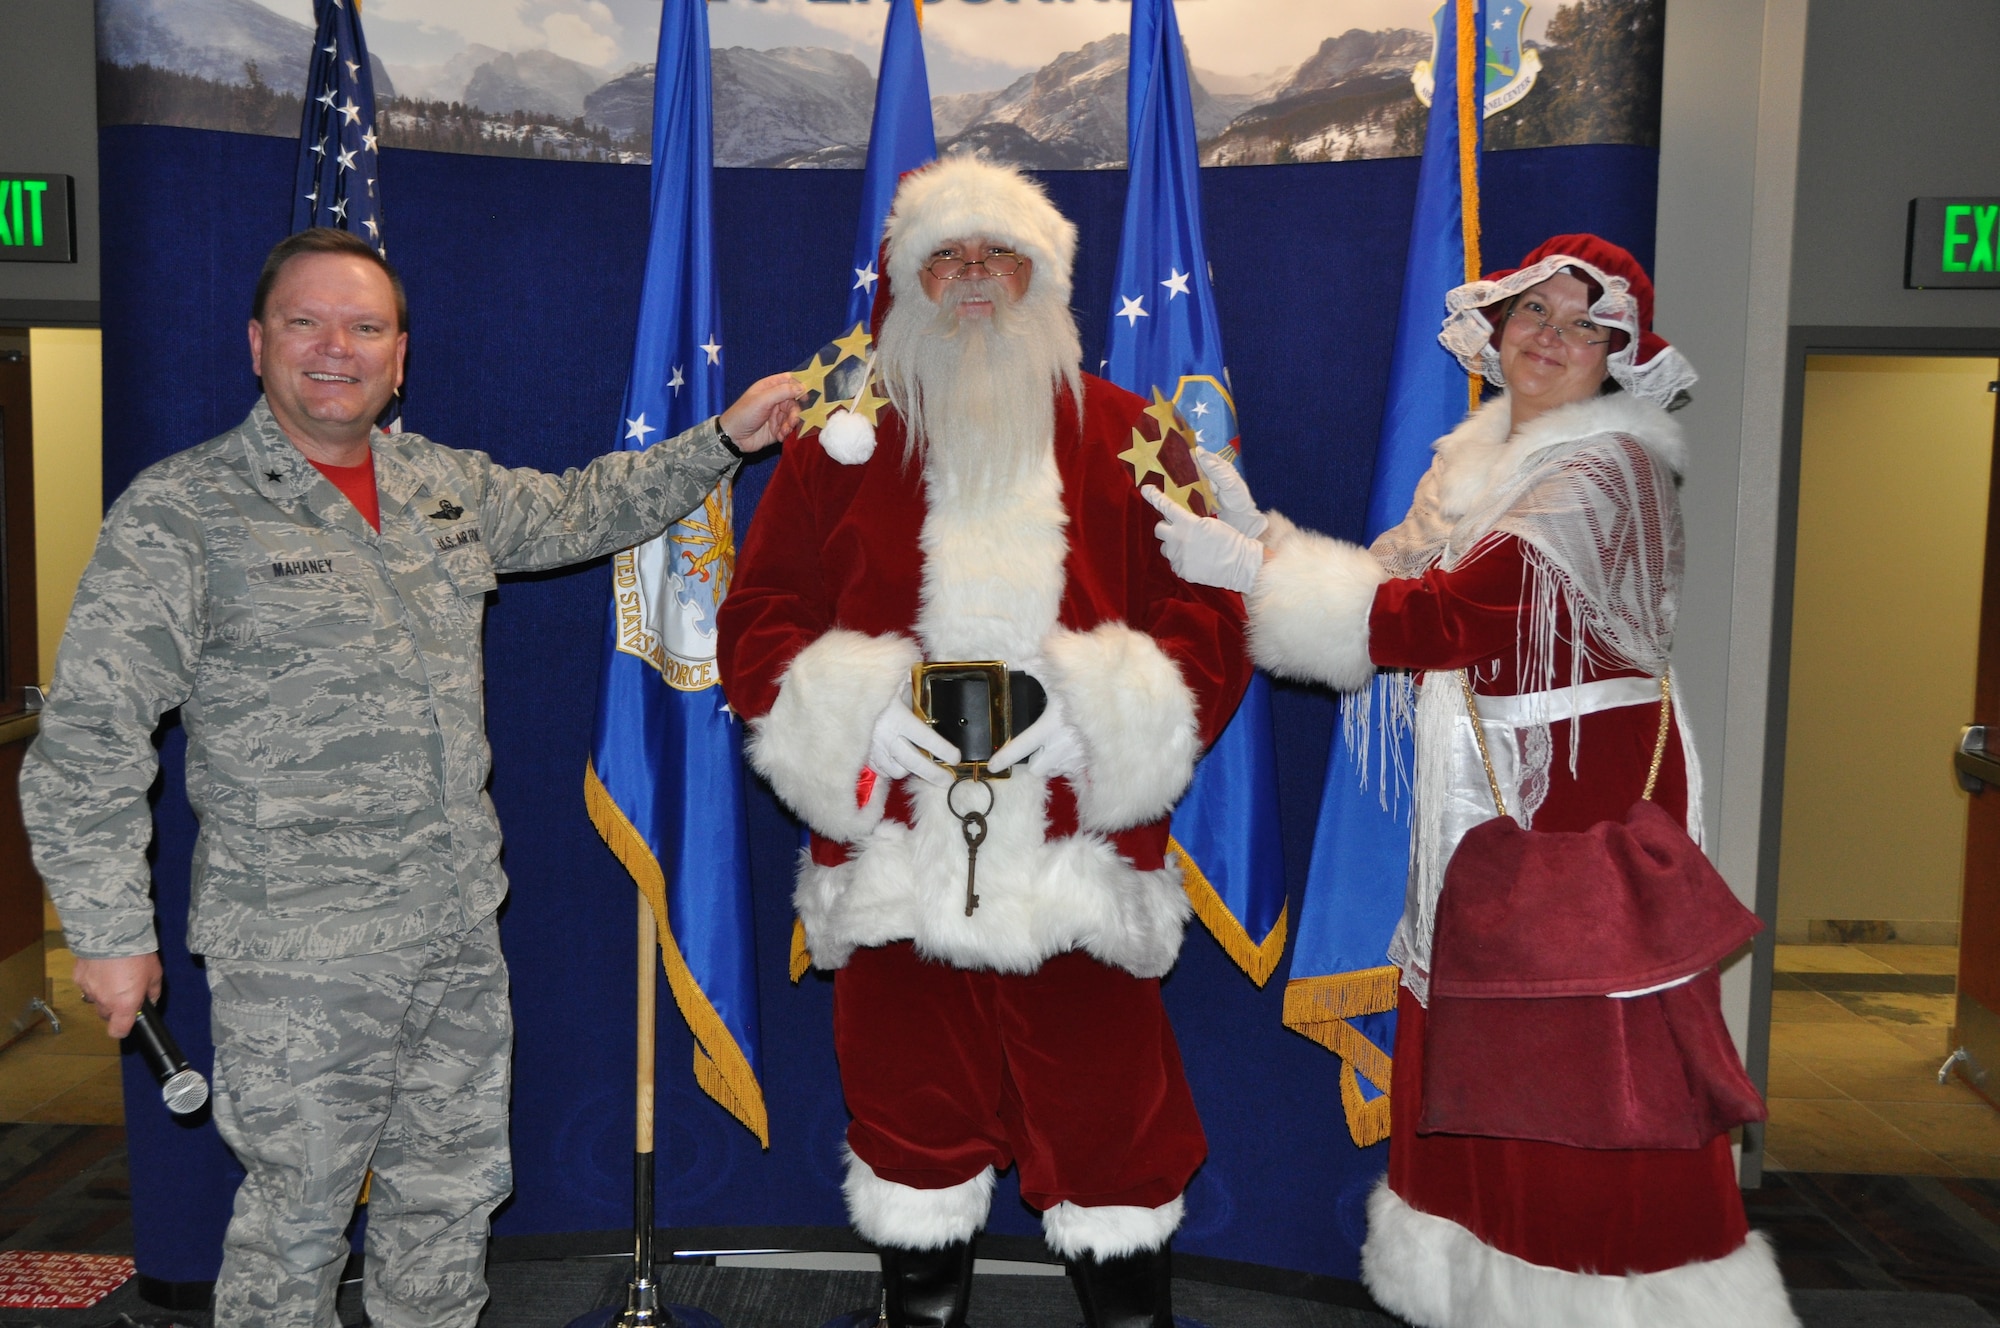 Santa and Mrs. Claus visits the Air Reserve Personnel Center Dec. 19, 2014, on Buckley Air Force Base, Colo. (U.S. Air Force photo/Tech. Sgt. Rob Hazelett)